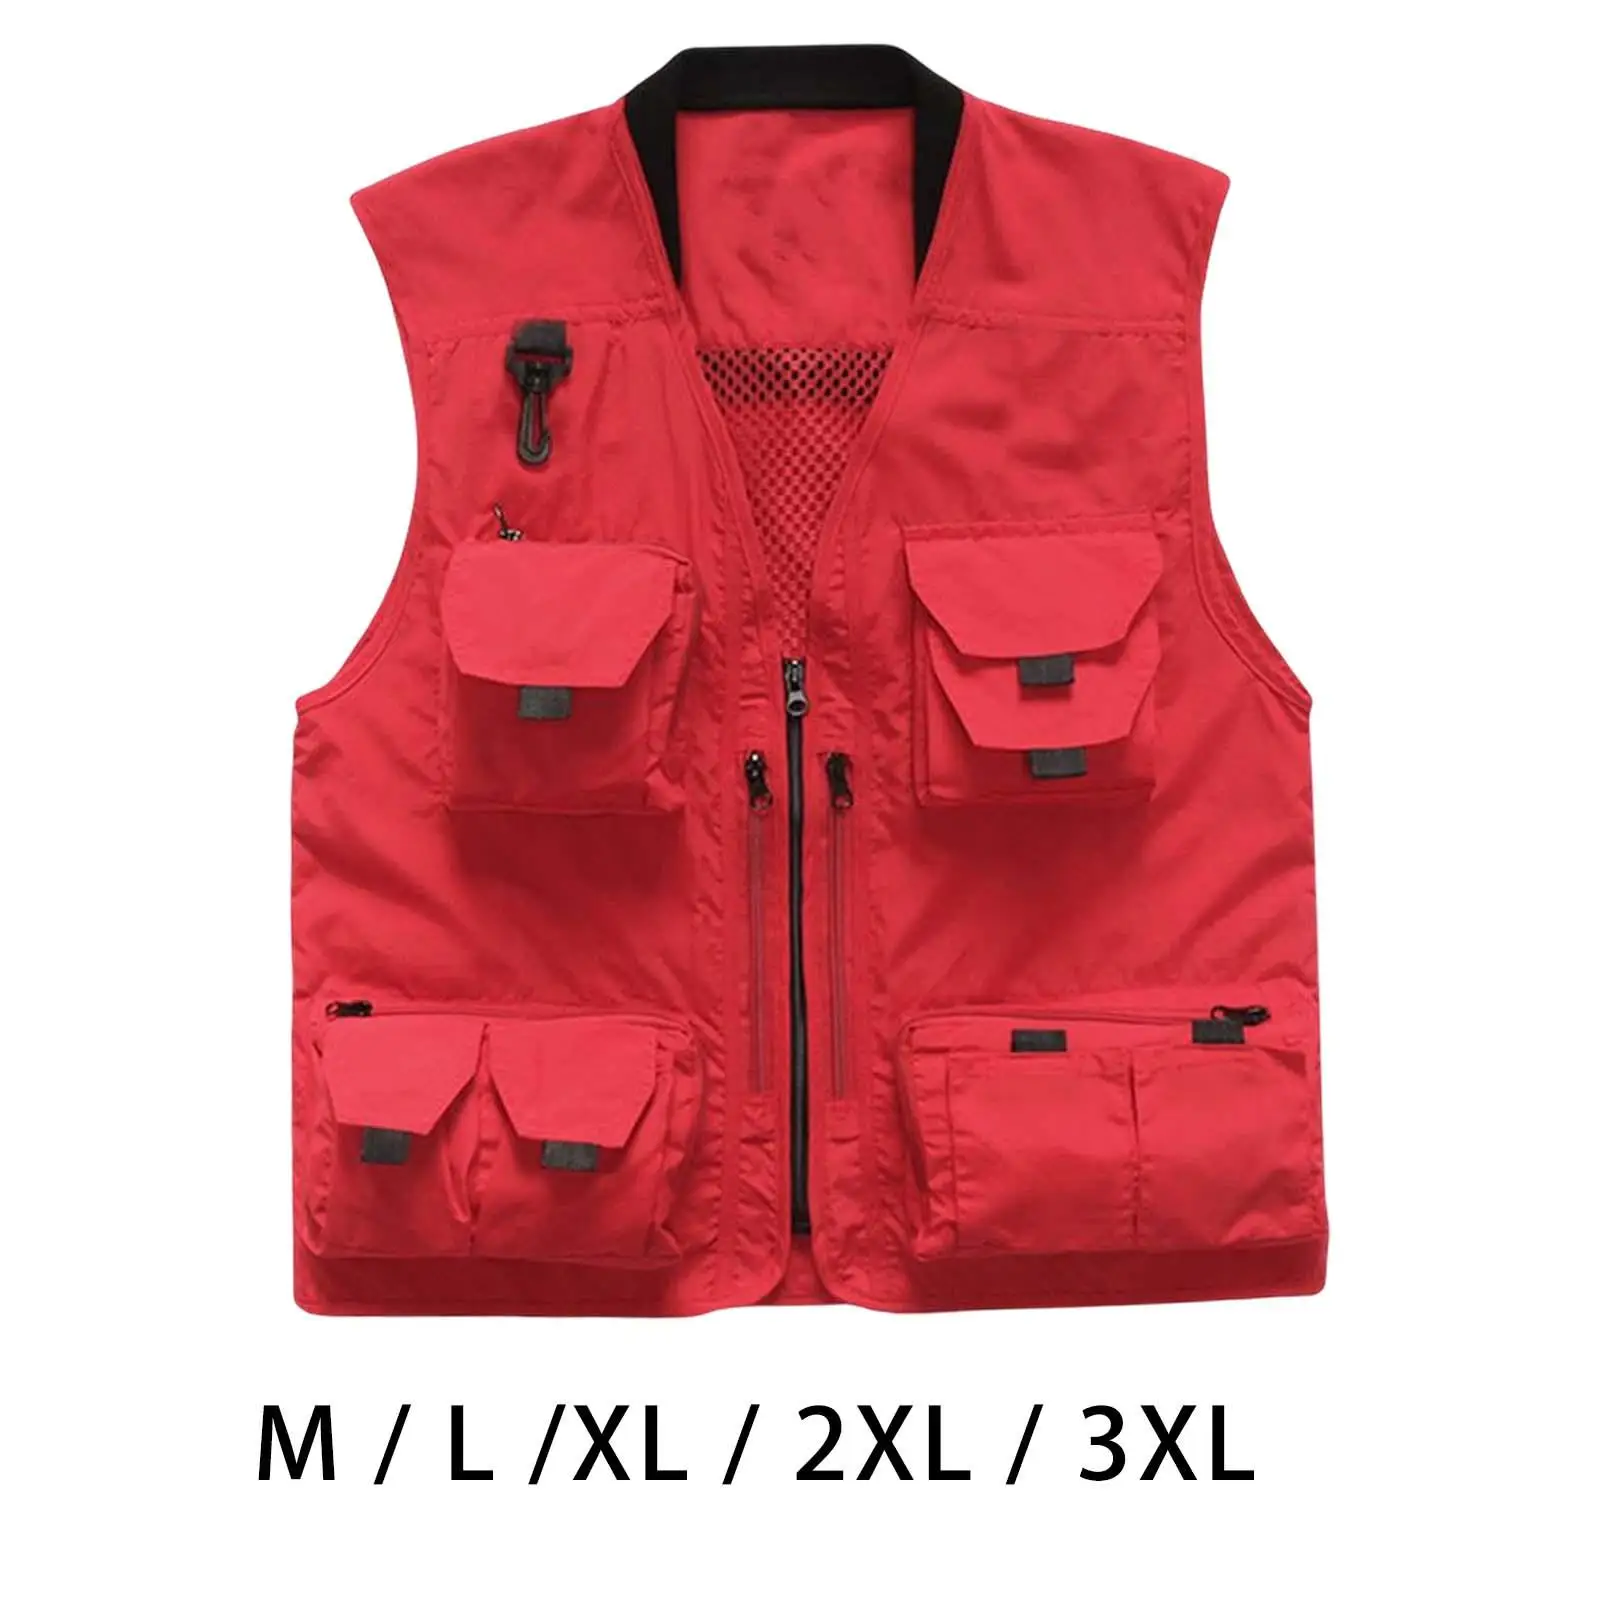 Men Fishing Vest with Multi Pockets Clothes Photography Waistcoat Mesh Jacket for Outdoor Activities Climbing Travel Camping